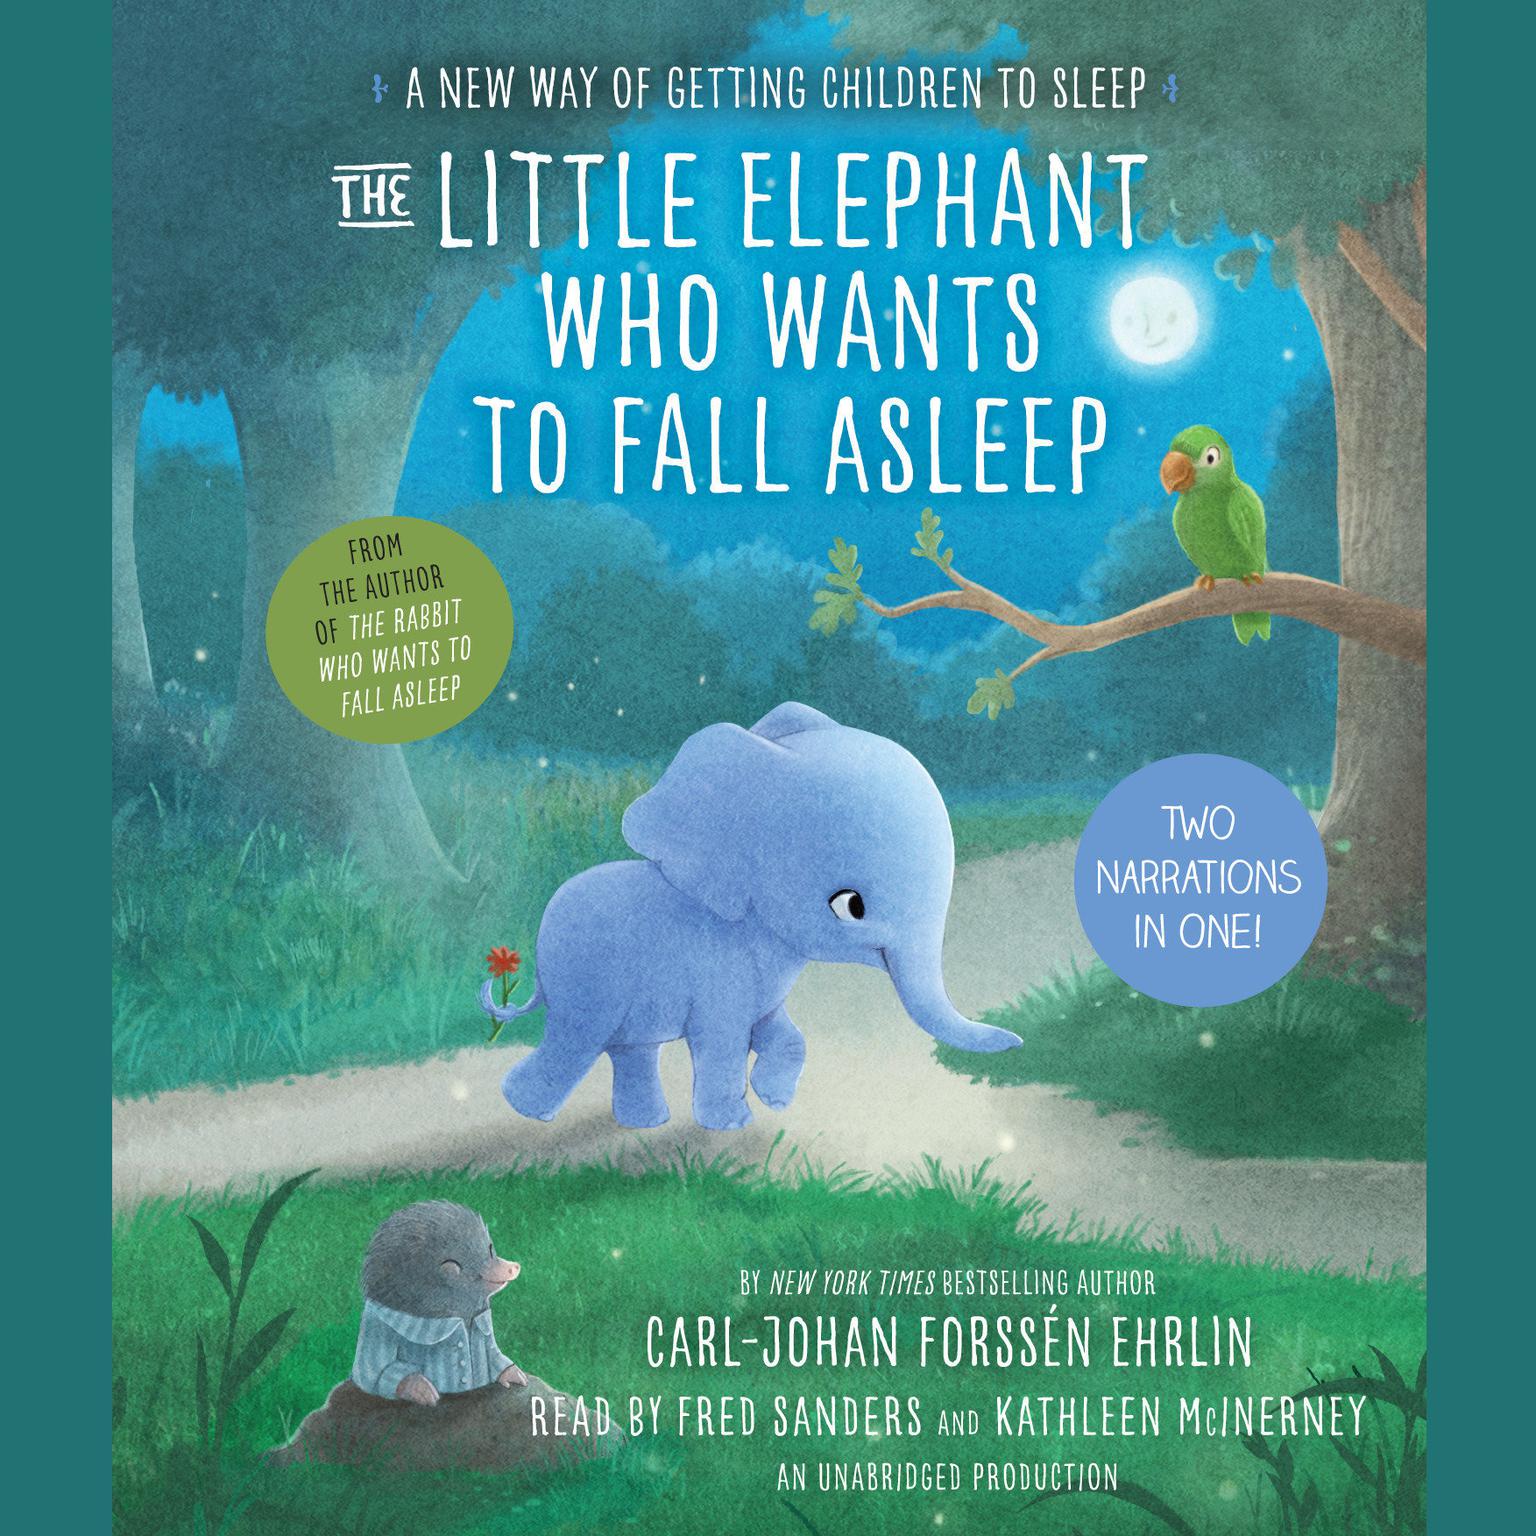 The Little Elephant Who Wants to Fall Asleep: A New Way of Getting Children to Sleep Audiobook, by Carl-Johan Forssén Ehrlin